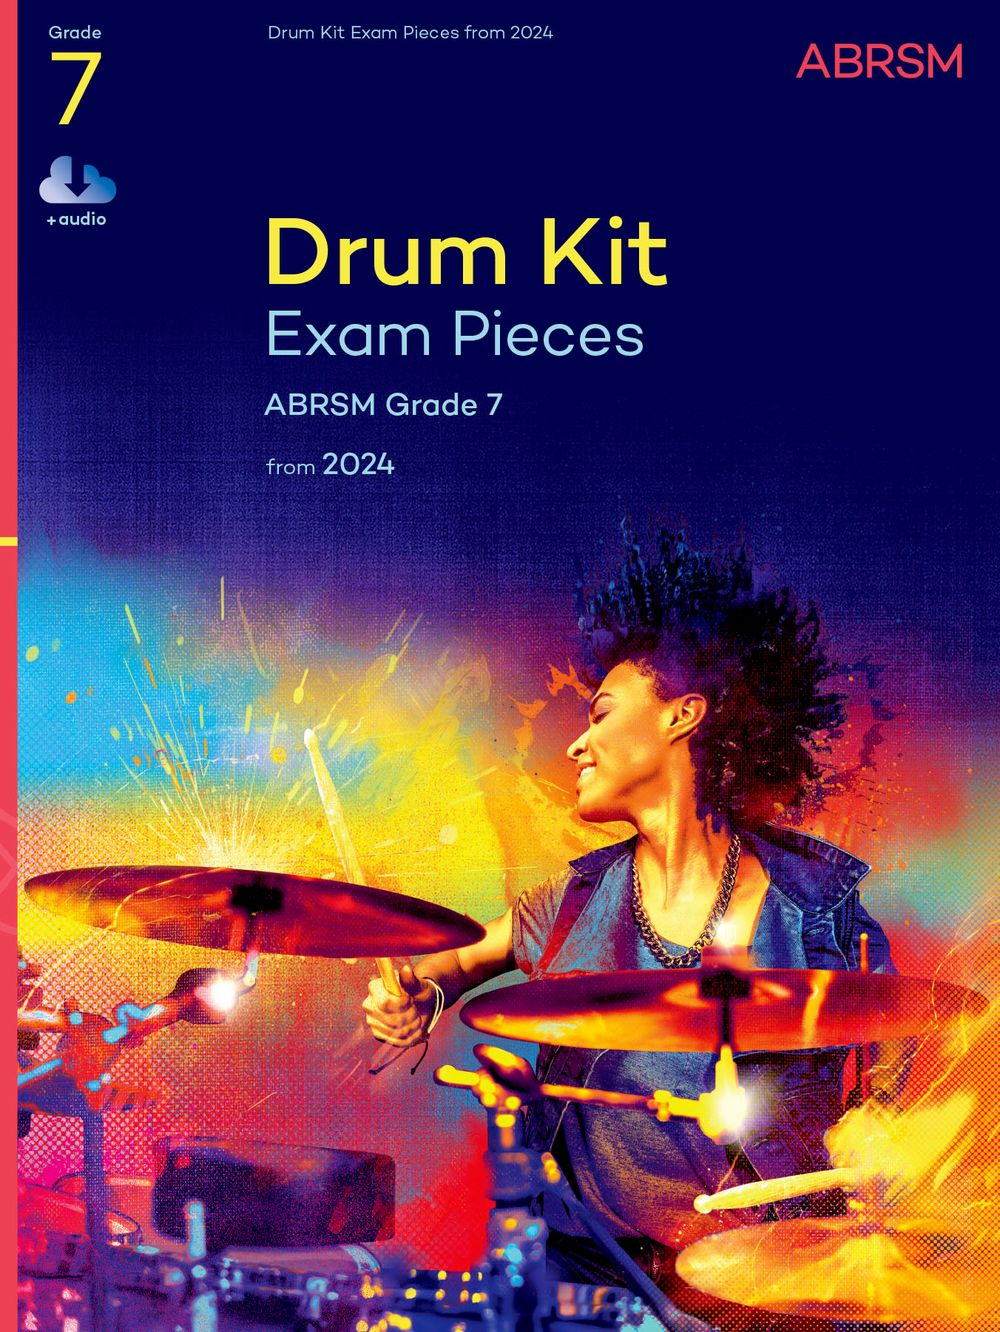 Drum Kit Exam Pieces From 2024 Grade 7 Abrsm Sheet Music Songbook